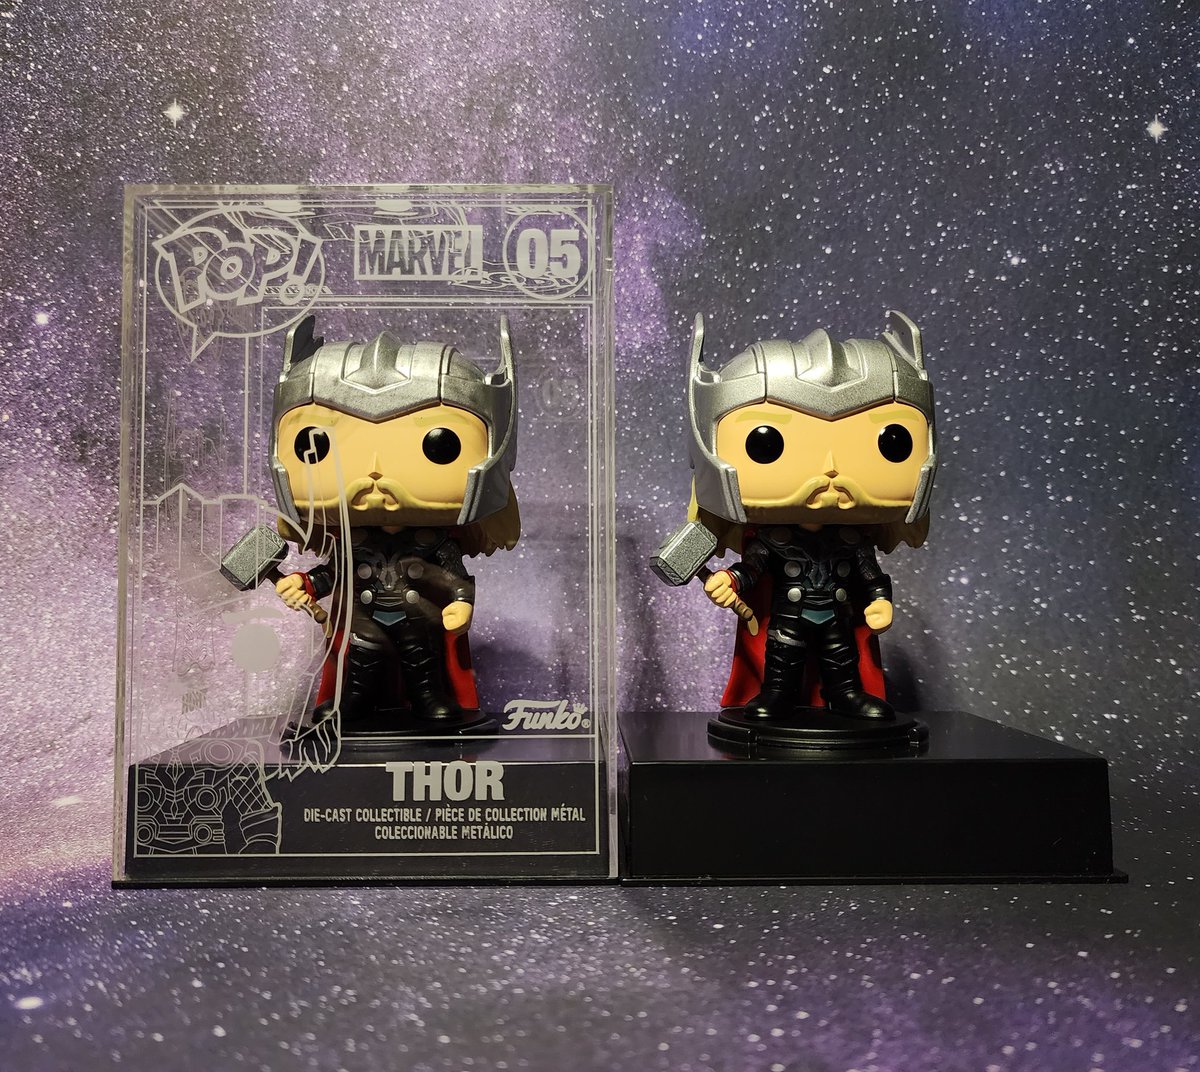 For more awesome Funko content check me out on Instagram at @beardypopguy

#Thor #originalfunko #funko #funkopop #funkocollector #funkopops #funkofamily #funkoaddict #funkomania #funkopopvinyl #funkophotography #pop #popvinyl #marvel #mcu https://t.co/oBeJNQ0UPe